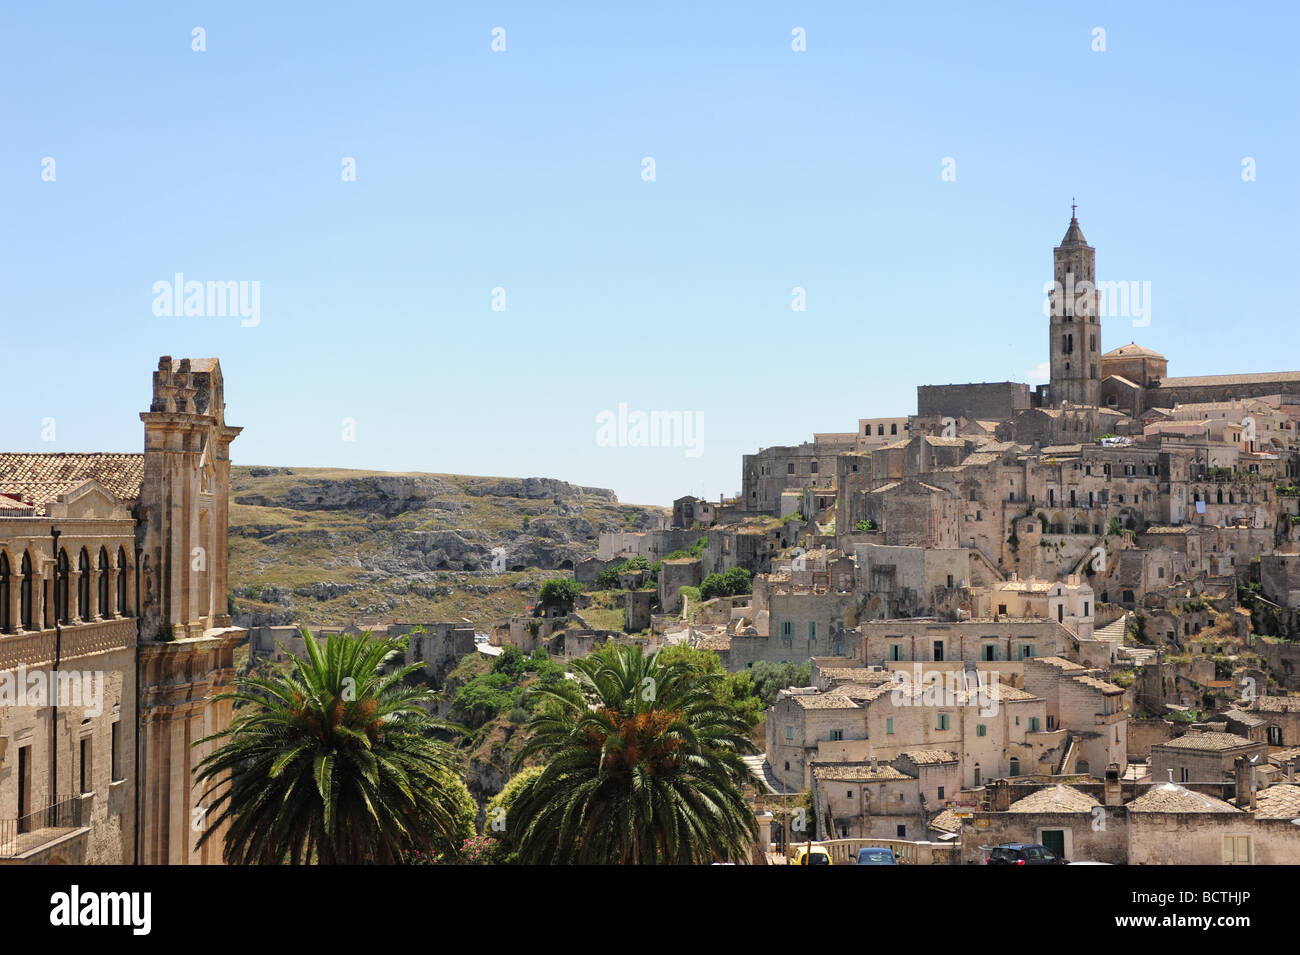 Europe Italy Matera in the region of Basilicata Set for the Passion of The Christ movie Stock Photo